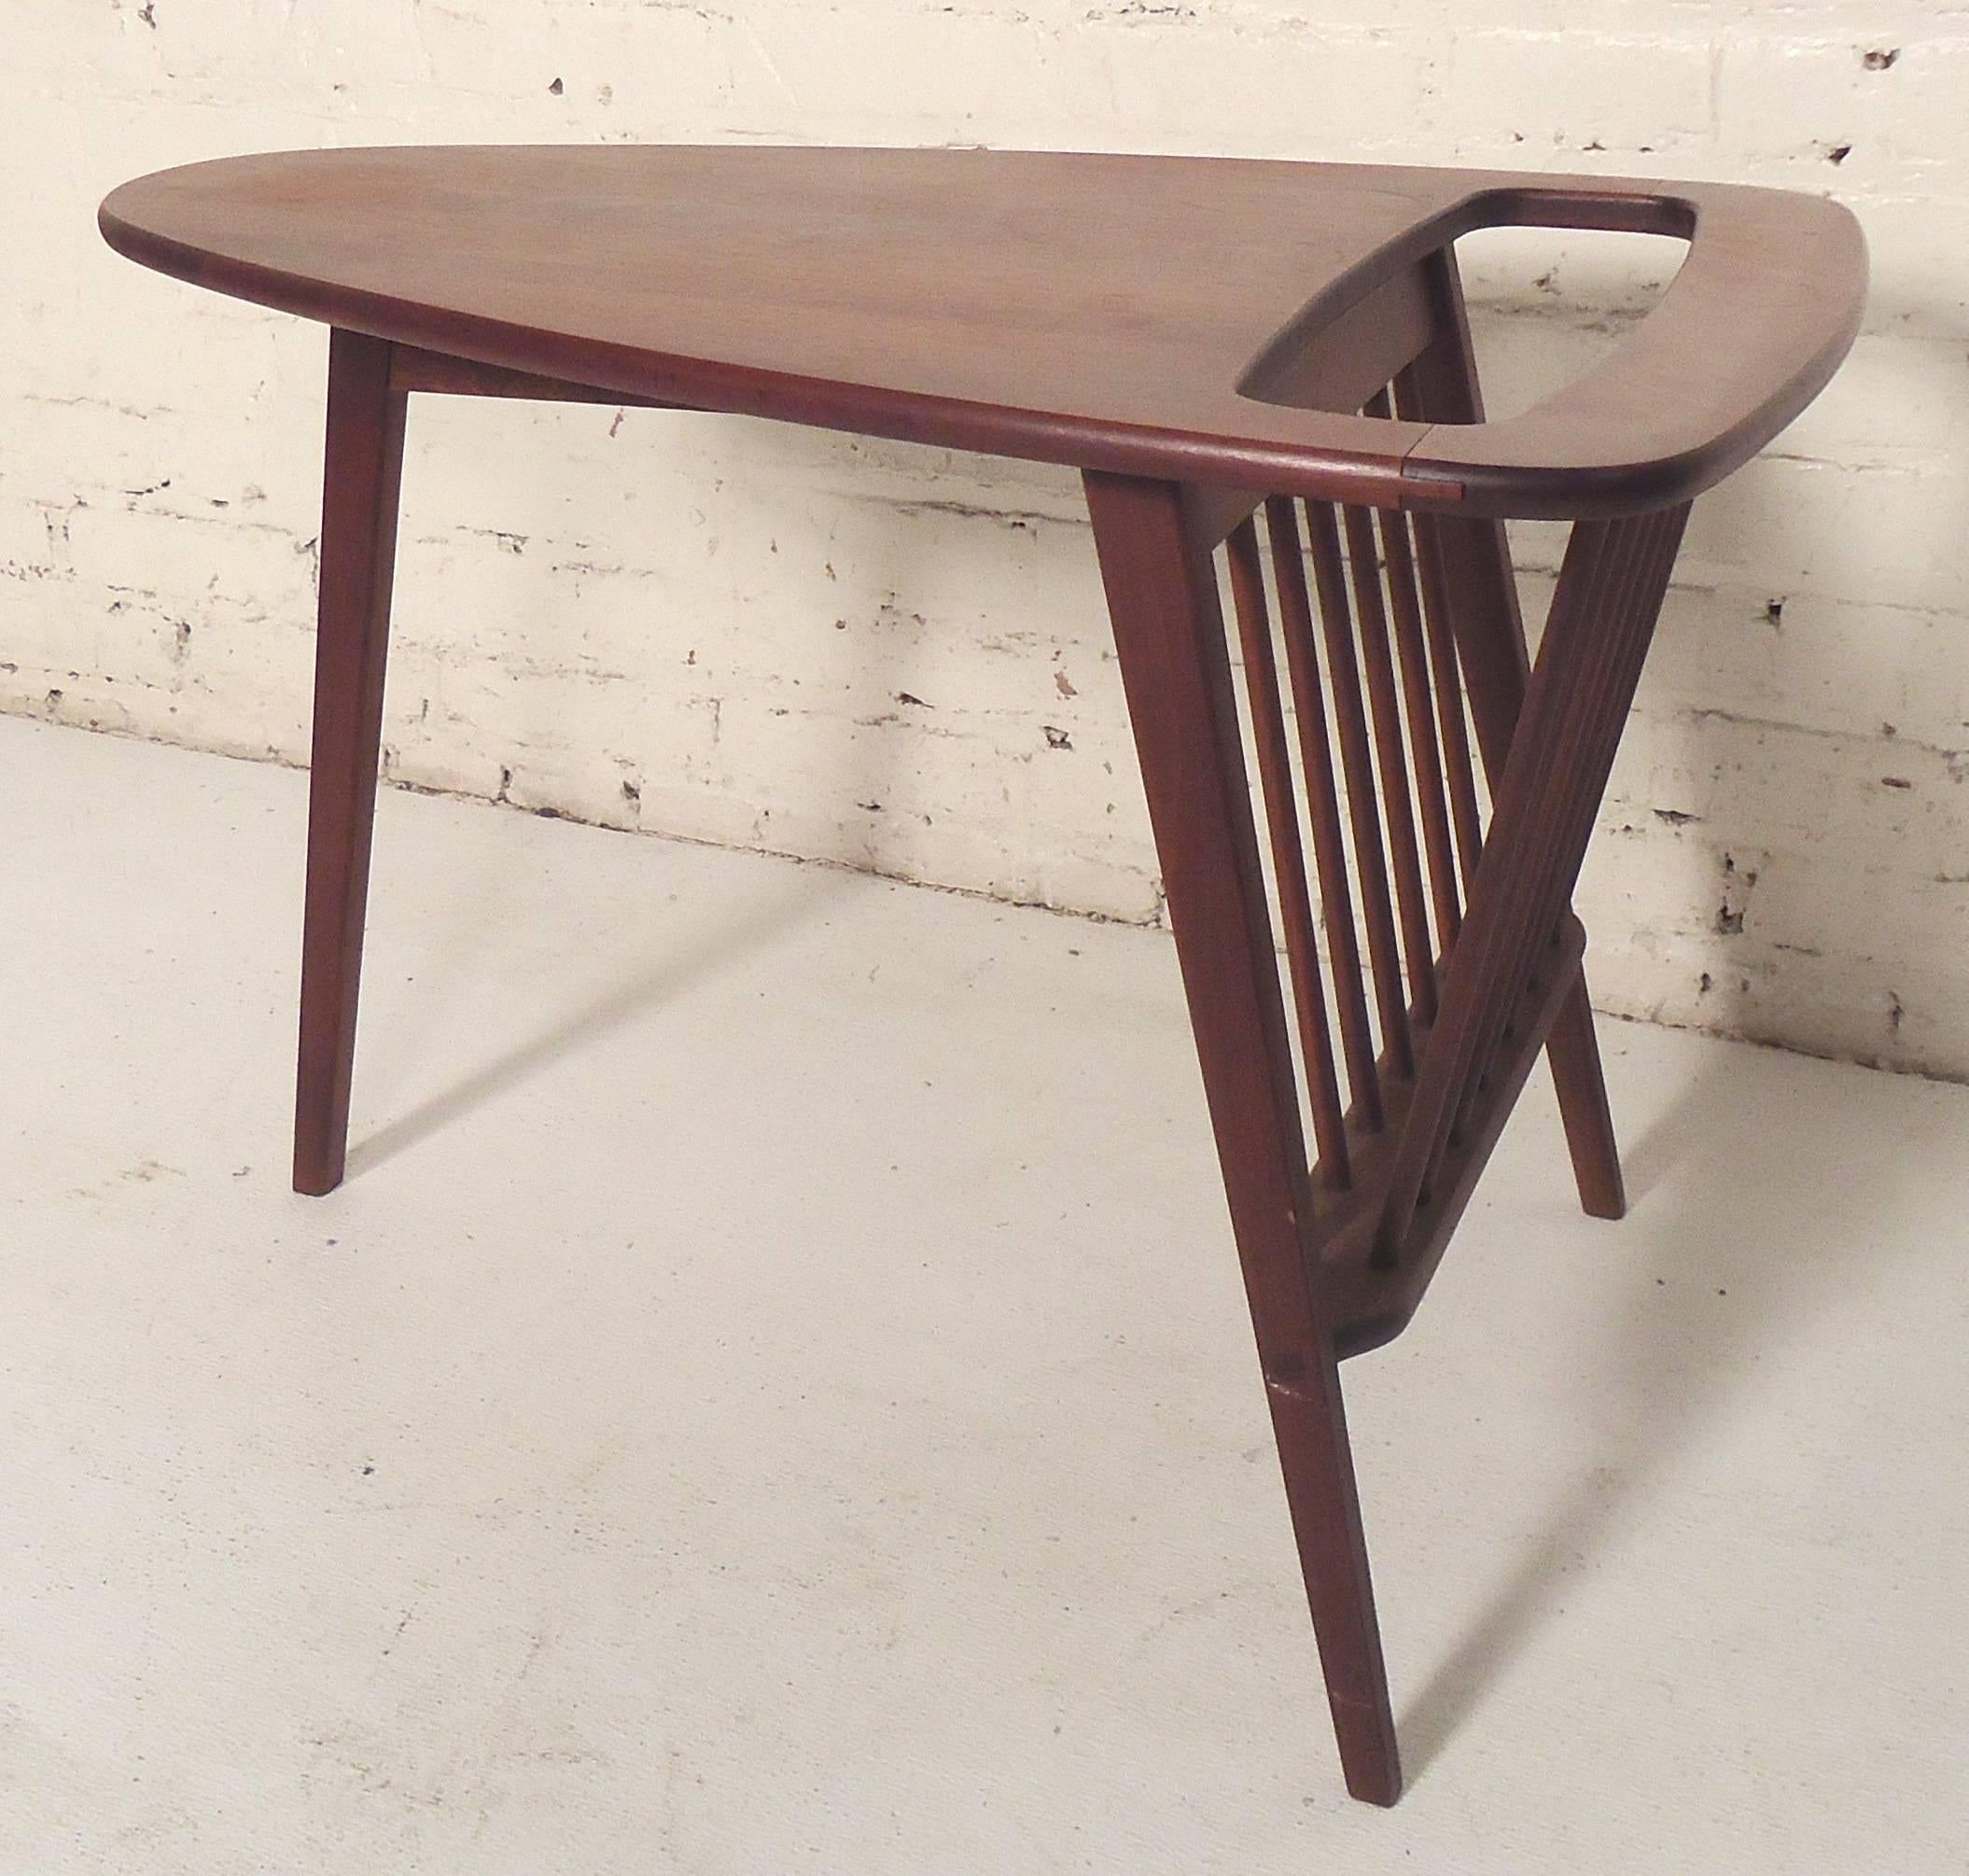 Fun midcentury design by Umanoff featuring a triangle top end table set on three legs. Deep walnut grain and spindle magazine rack.

(Please confirm item location - NY or NJ - with dealer).
 